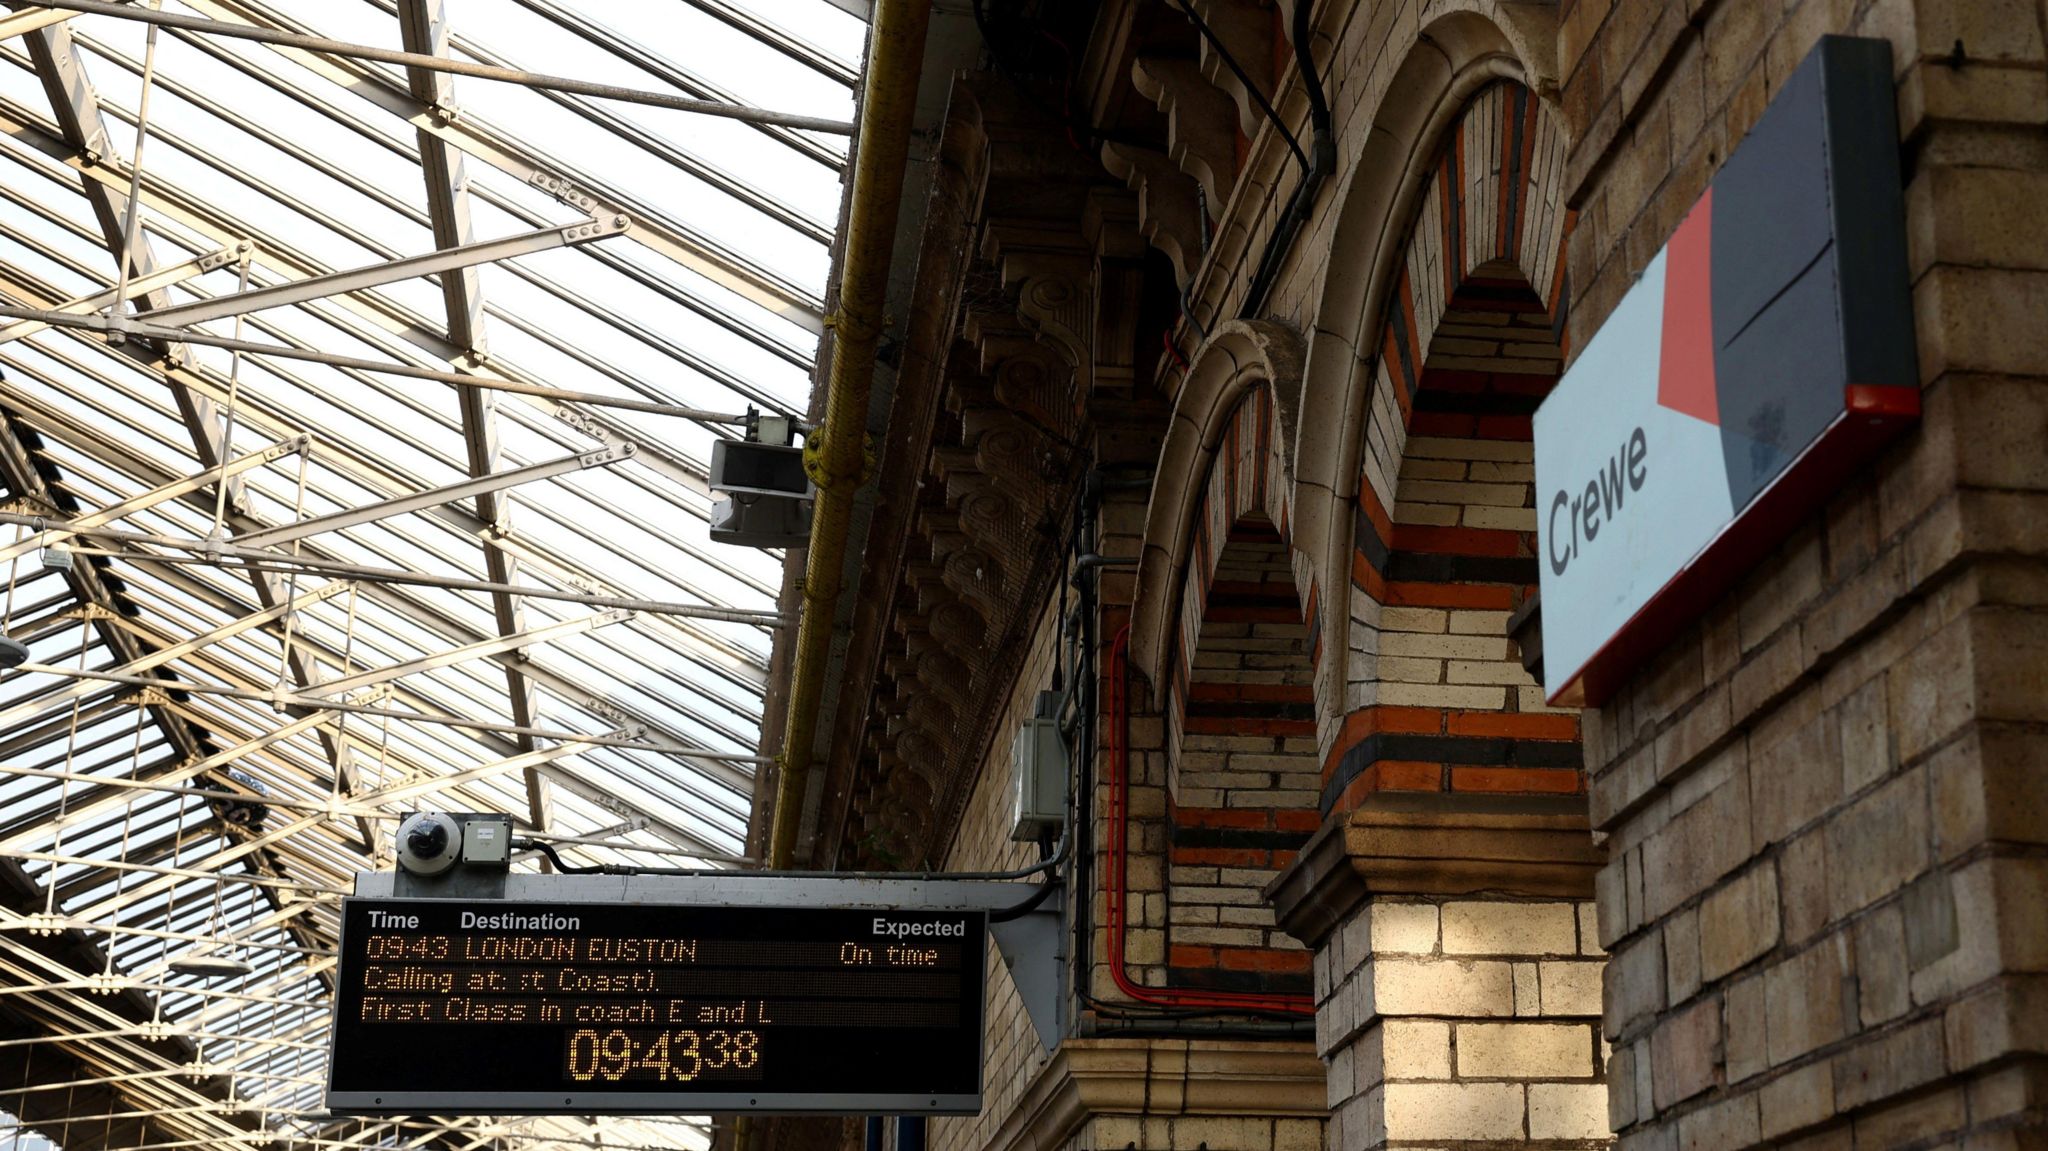 An information board and a sign that says Crewe at Crewe Station in Cheshire